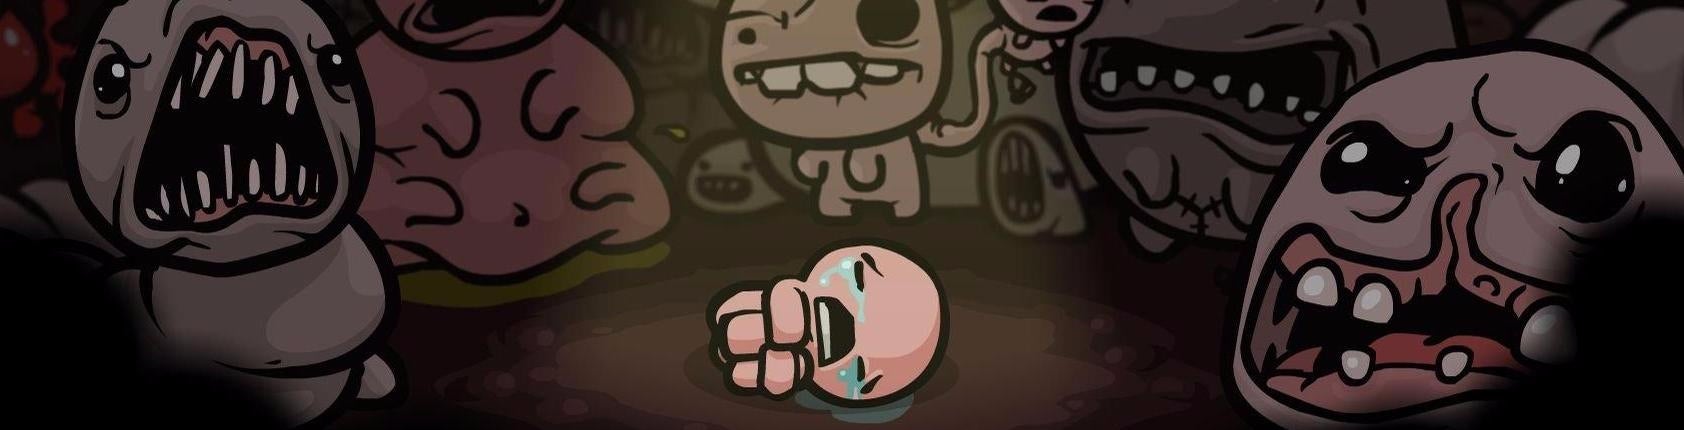 Image for Watch: Chris plays The Binding of Isaac for the first time